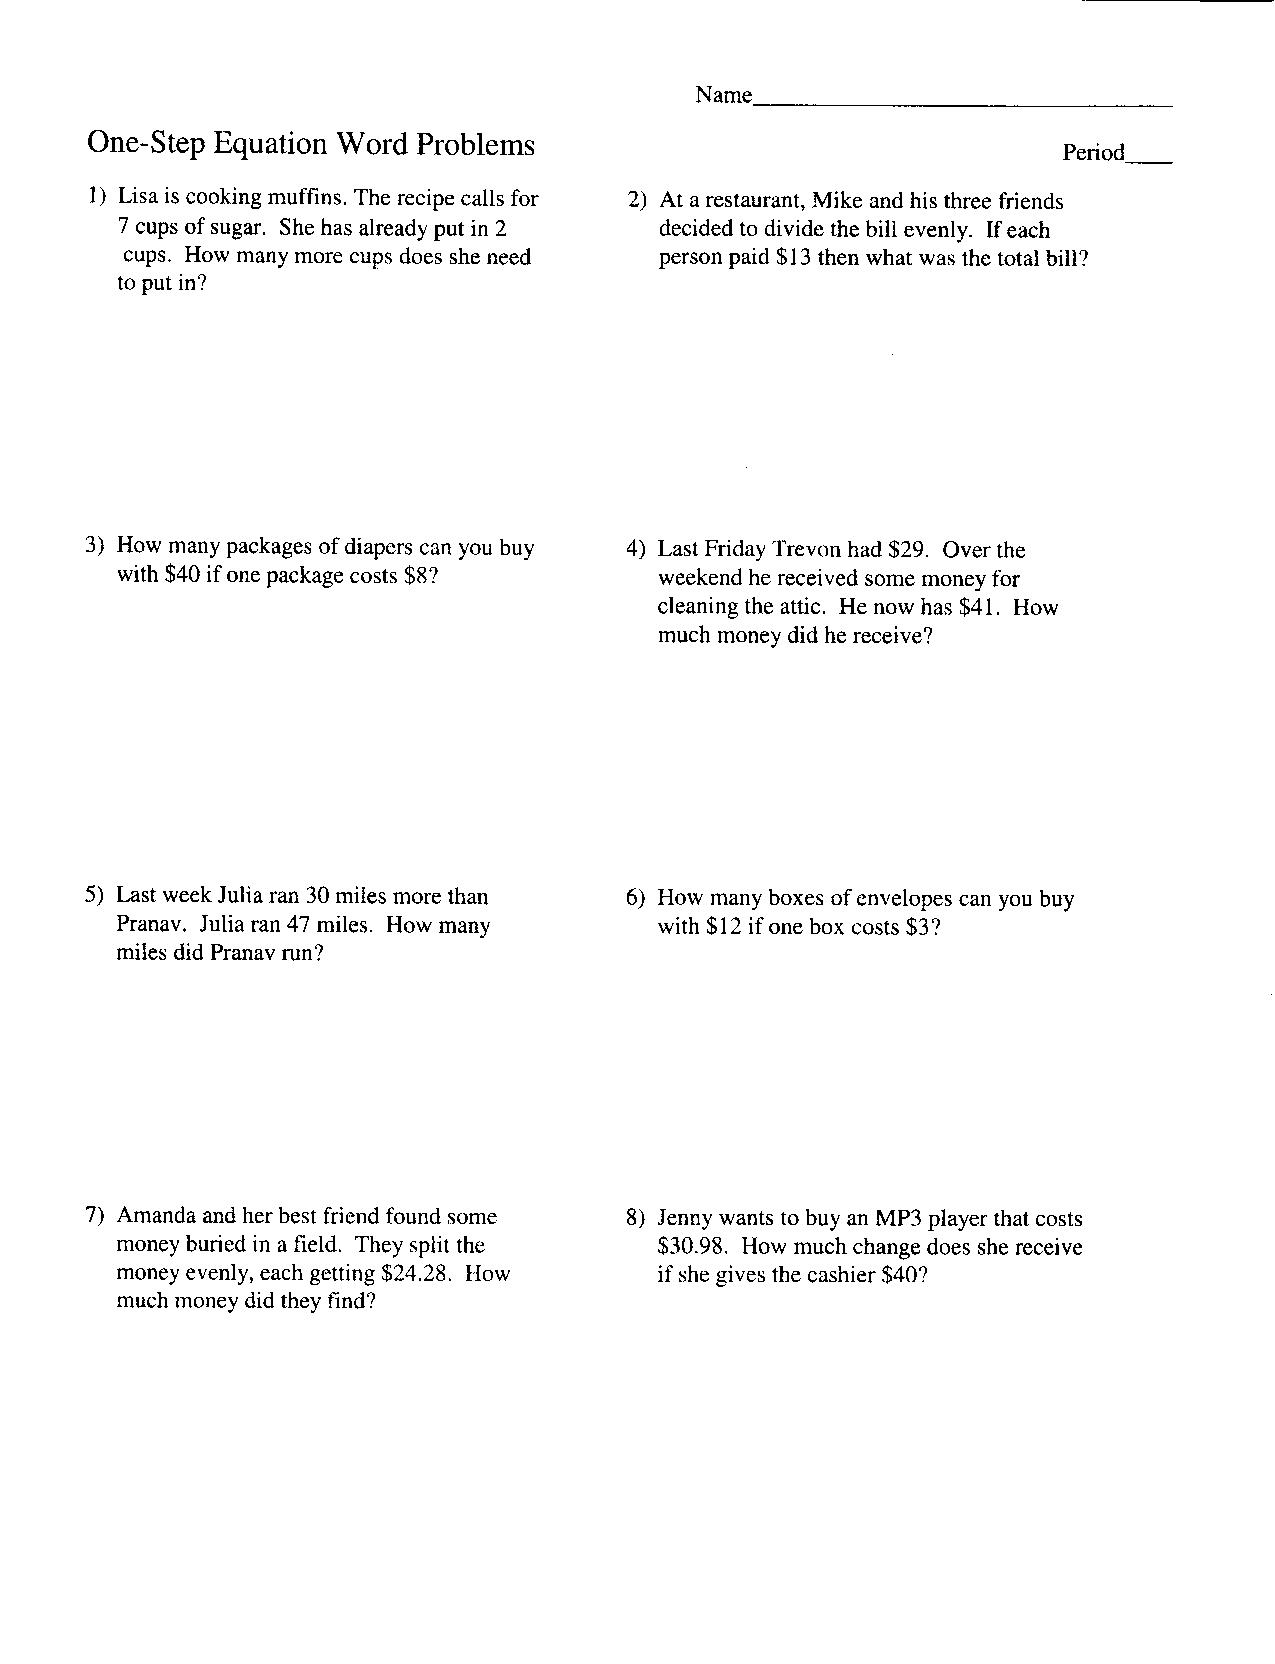 One Step Equation Word Problems Worksheets Image